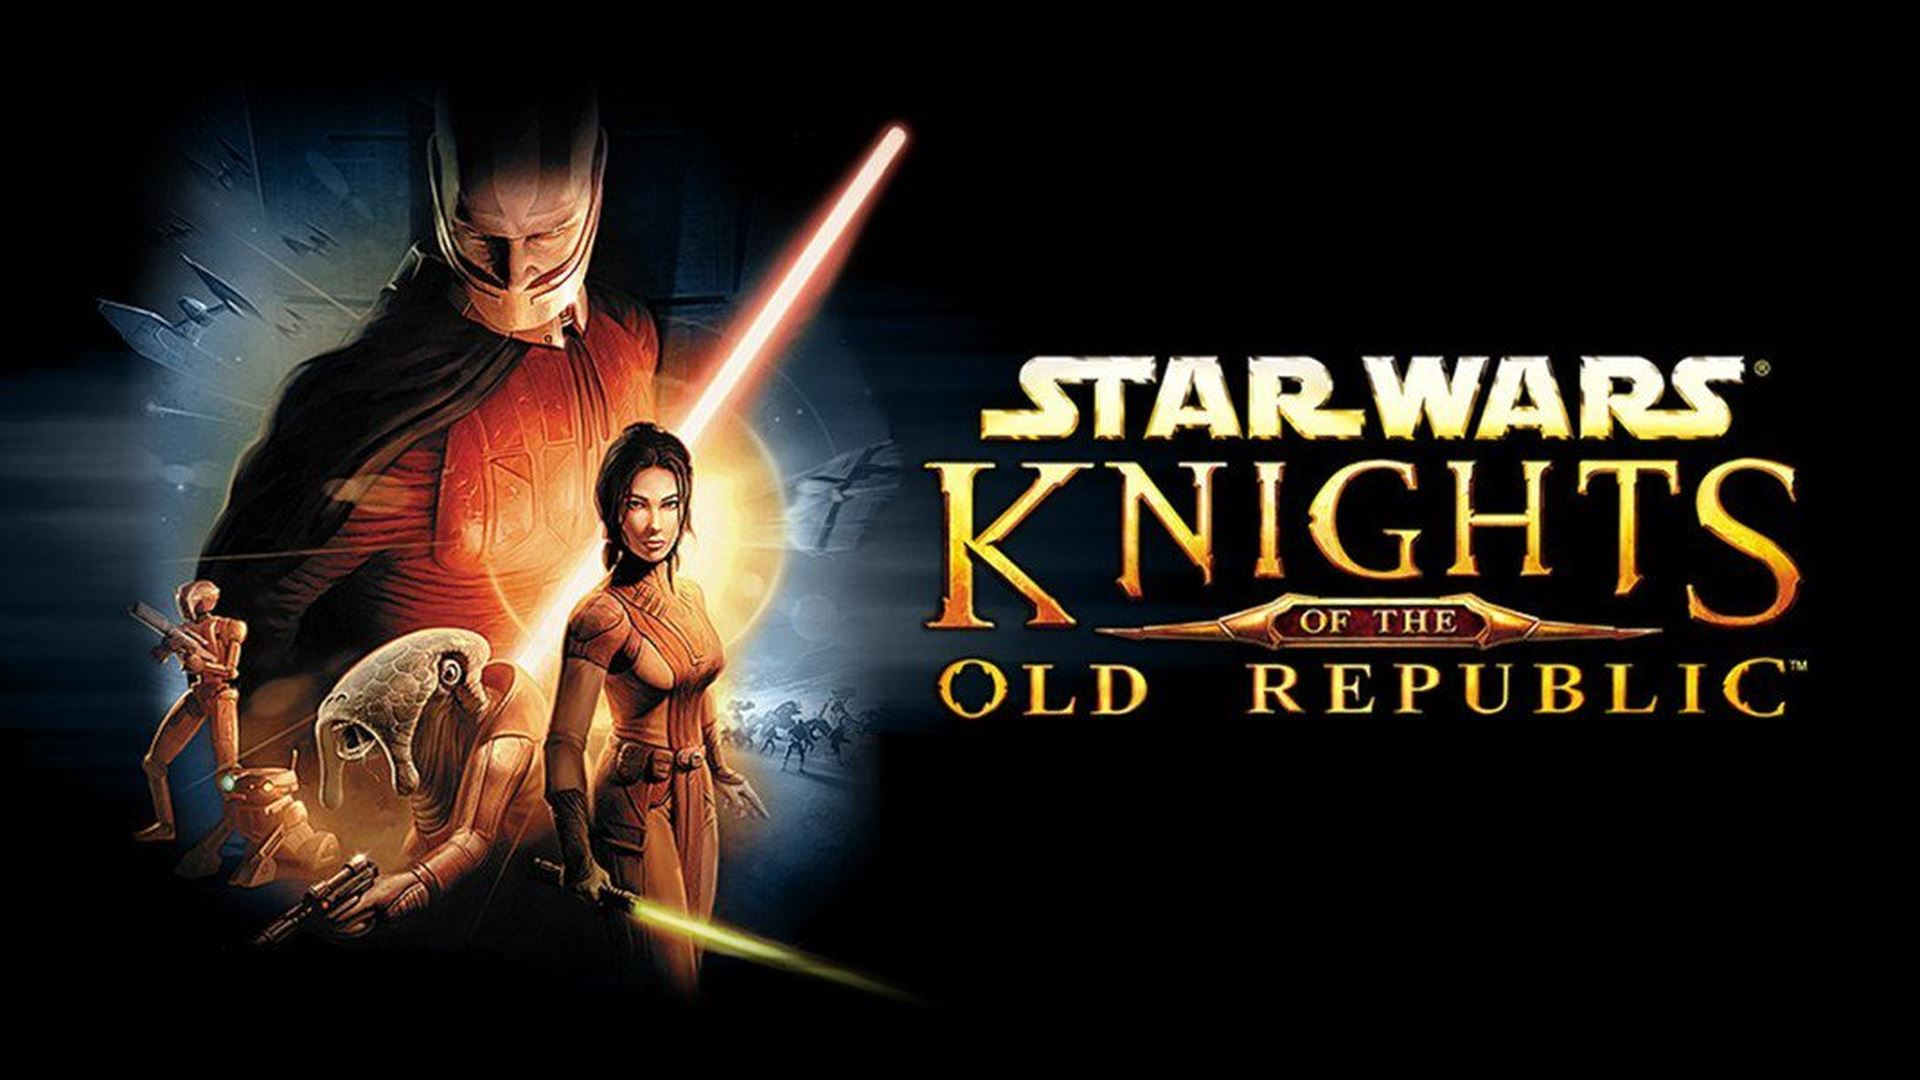 Star wars knights of the old republic русификатор для steam фото 2